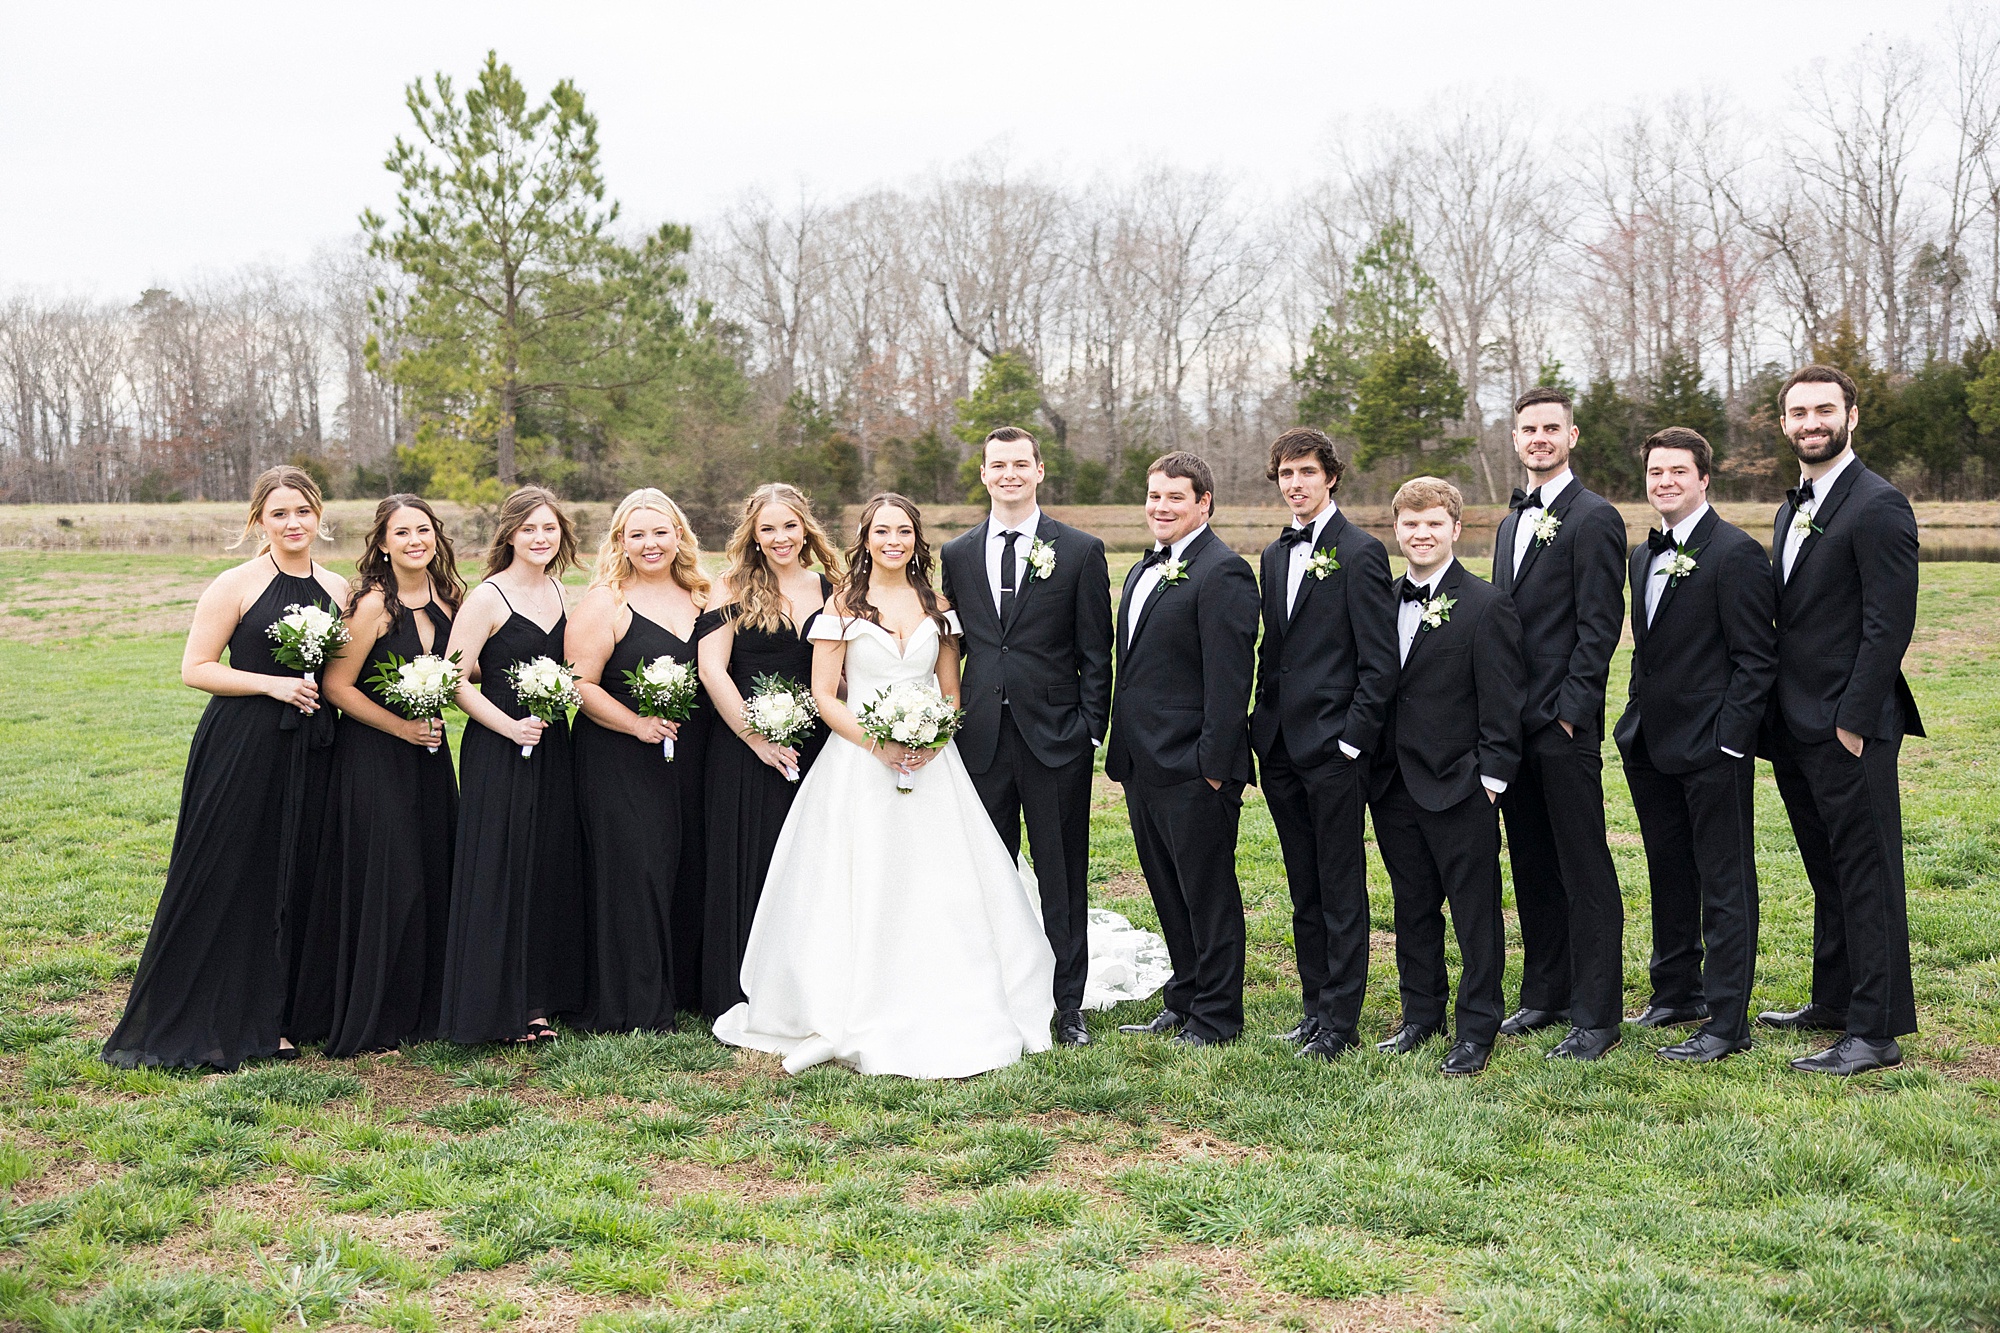 newlyweds pose with wedding party in all black attire